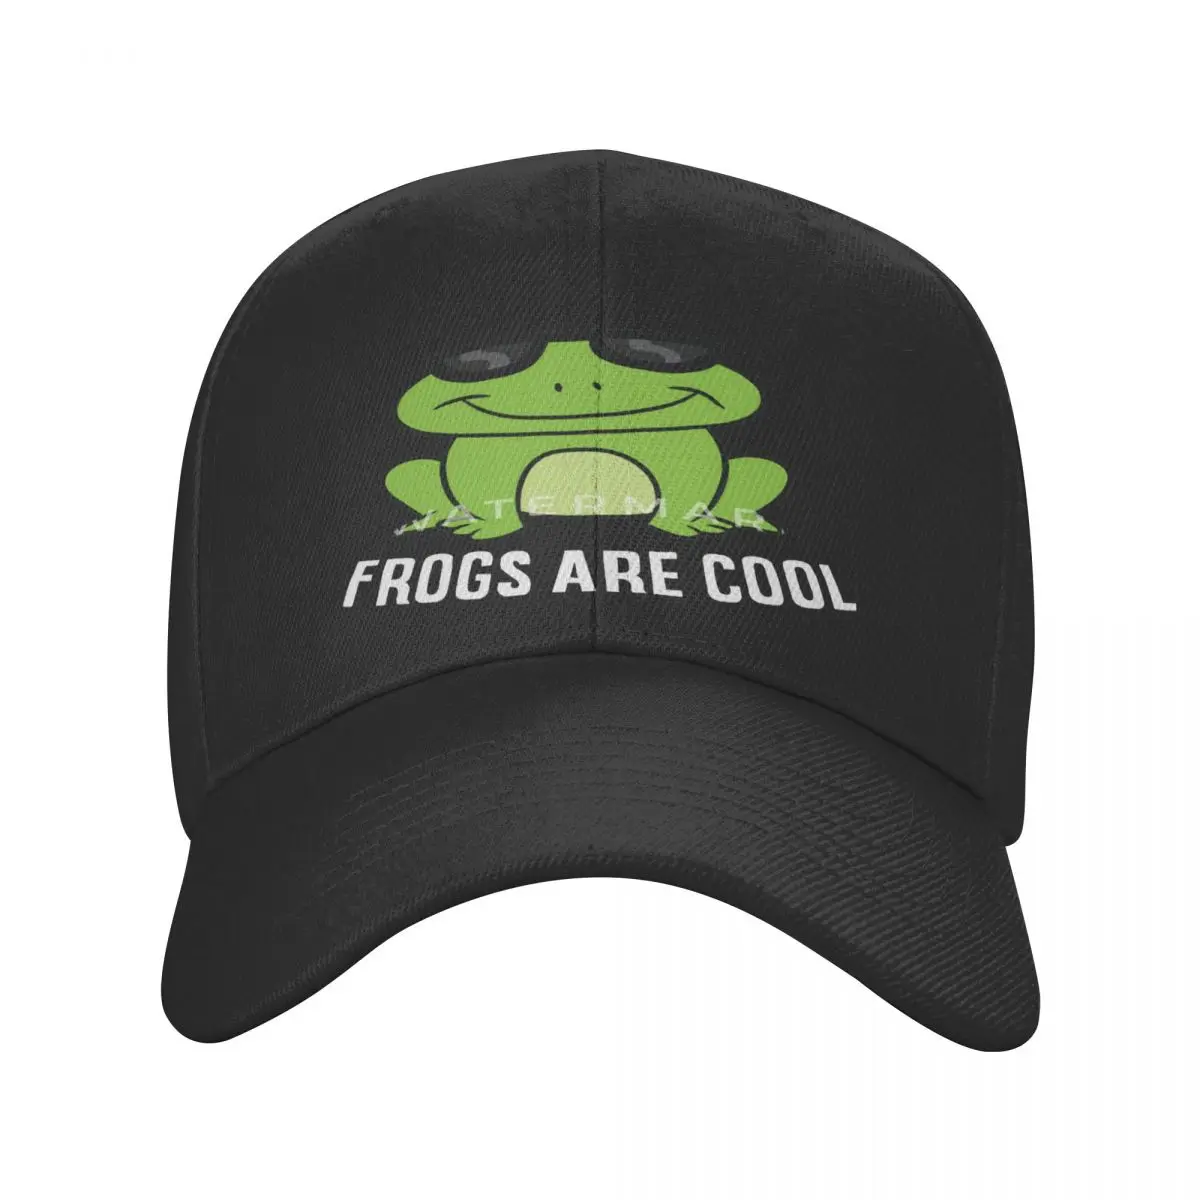 

Frogs Are Cool Casquette, Polyester Cap Fashionable Practical Travel Nice Gift